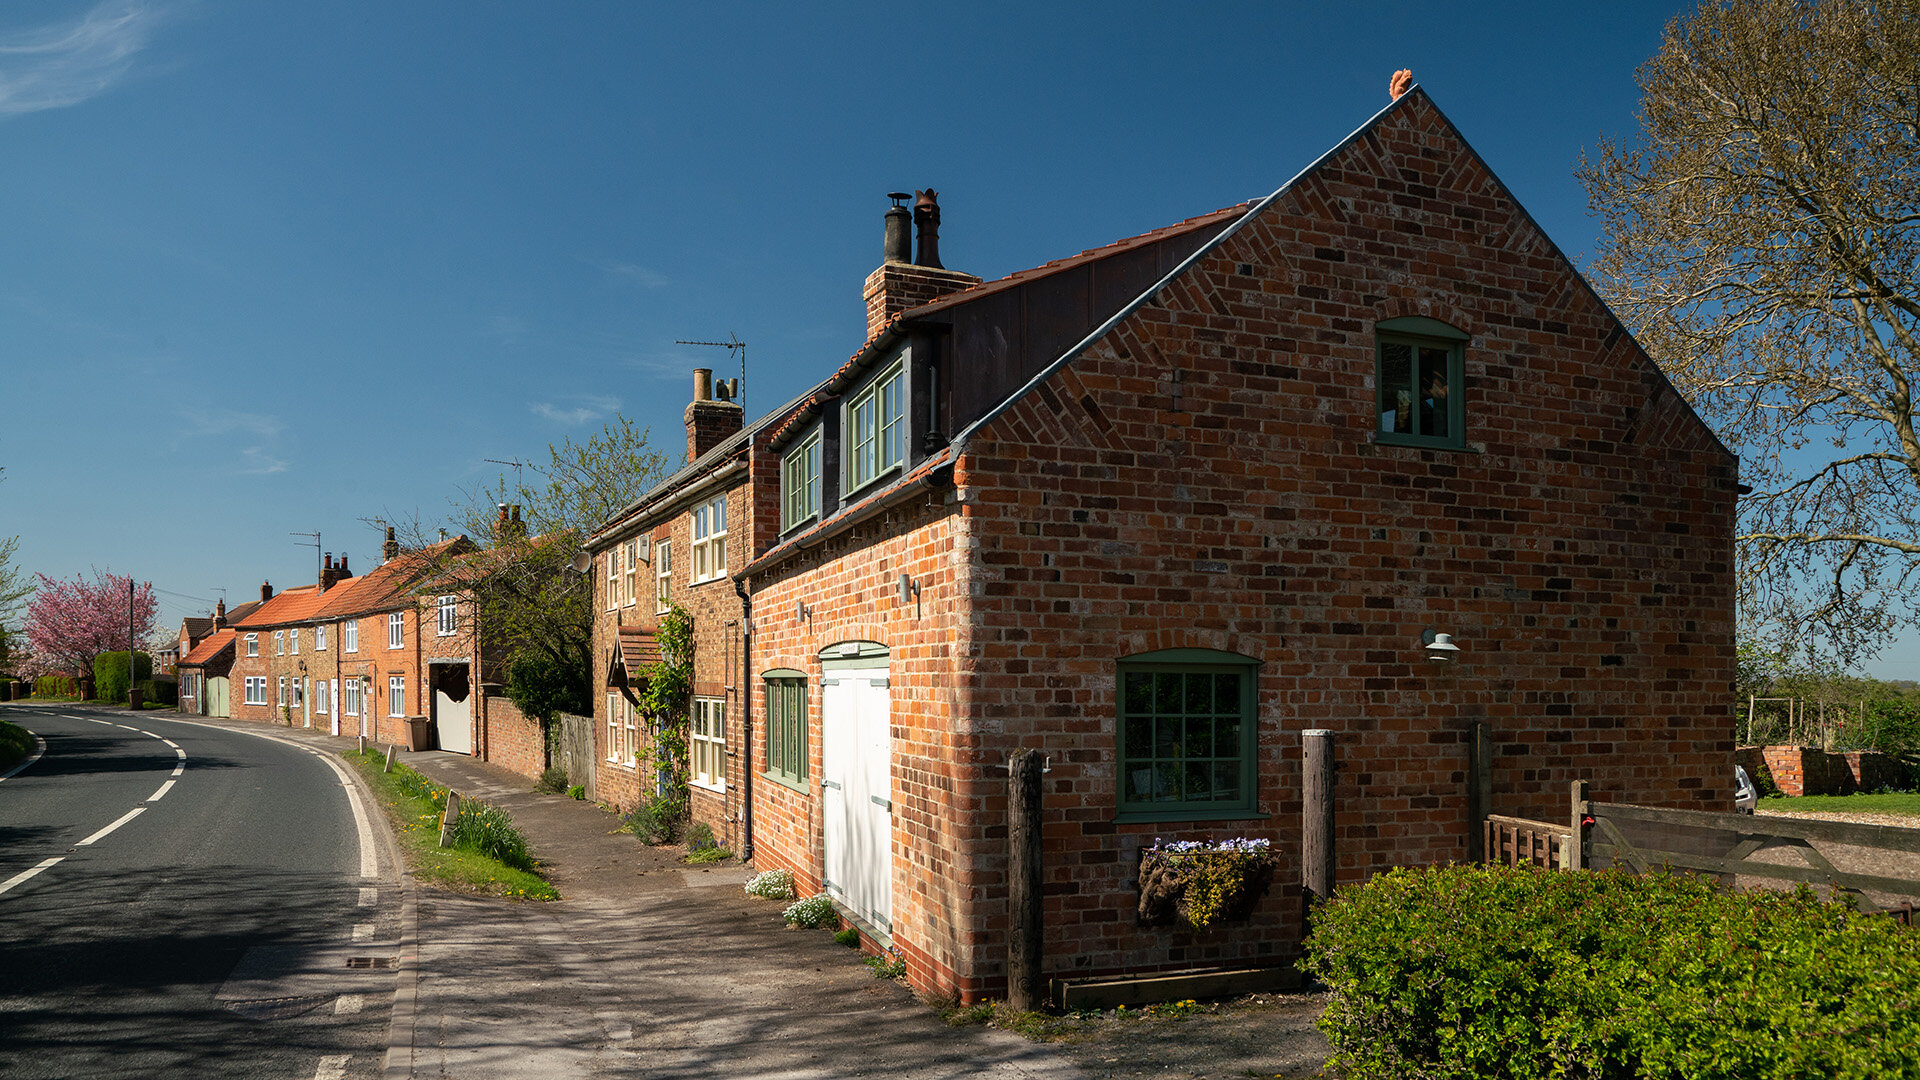 The Old Forge Street - Hornsea Architects - Samuel Kendall Associates